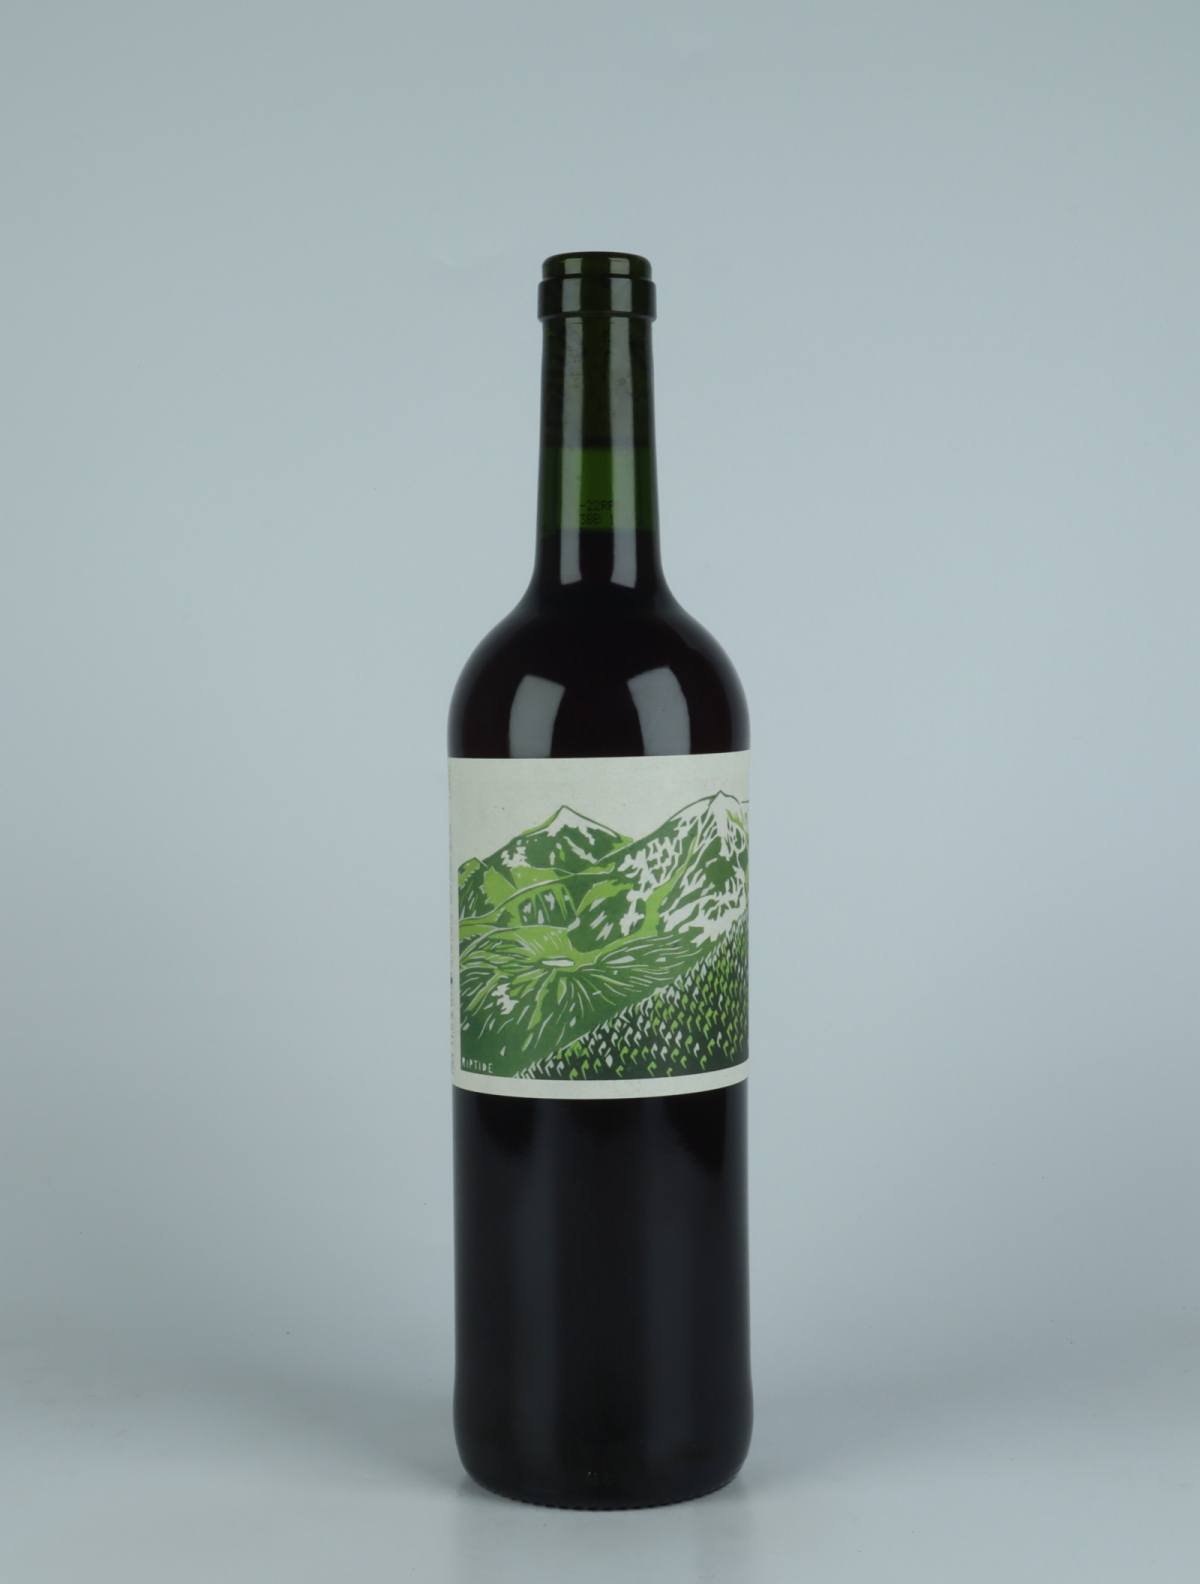 A bottle 2022 Transhumància Riptide Red wine from Domaine Cotzé, Pyrenees in France